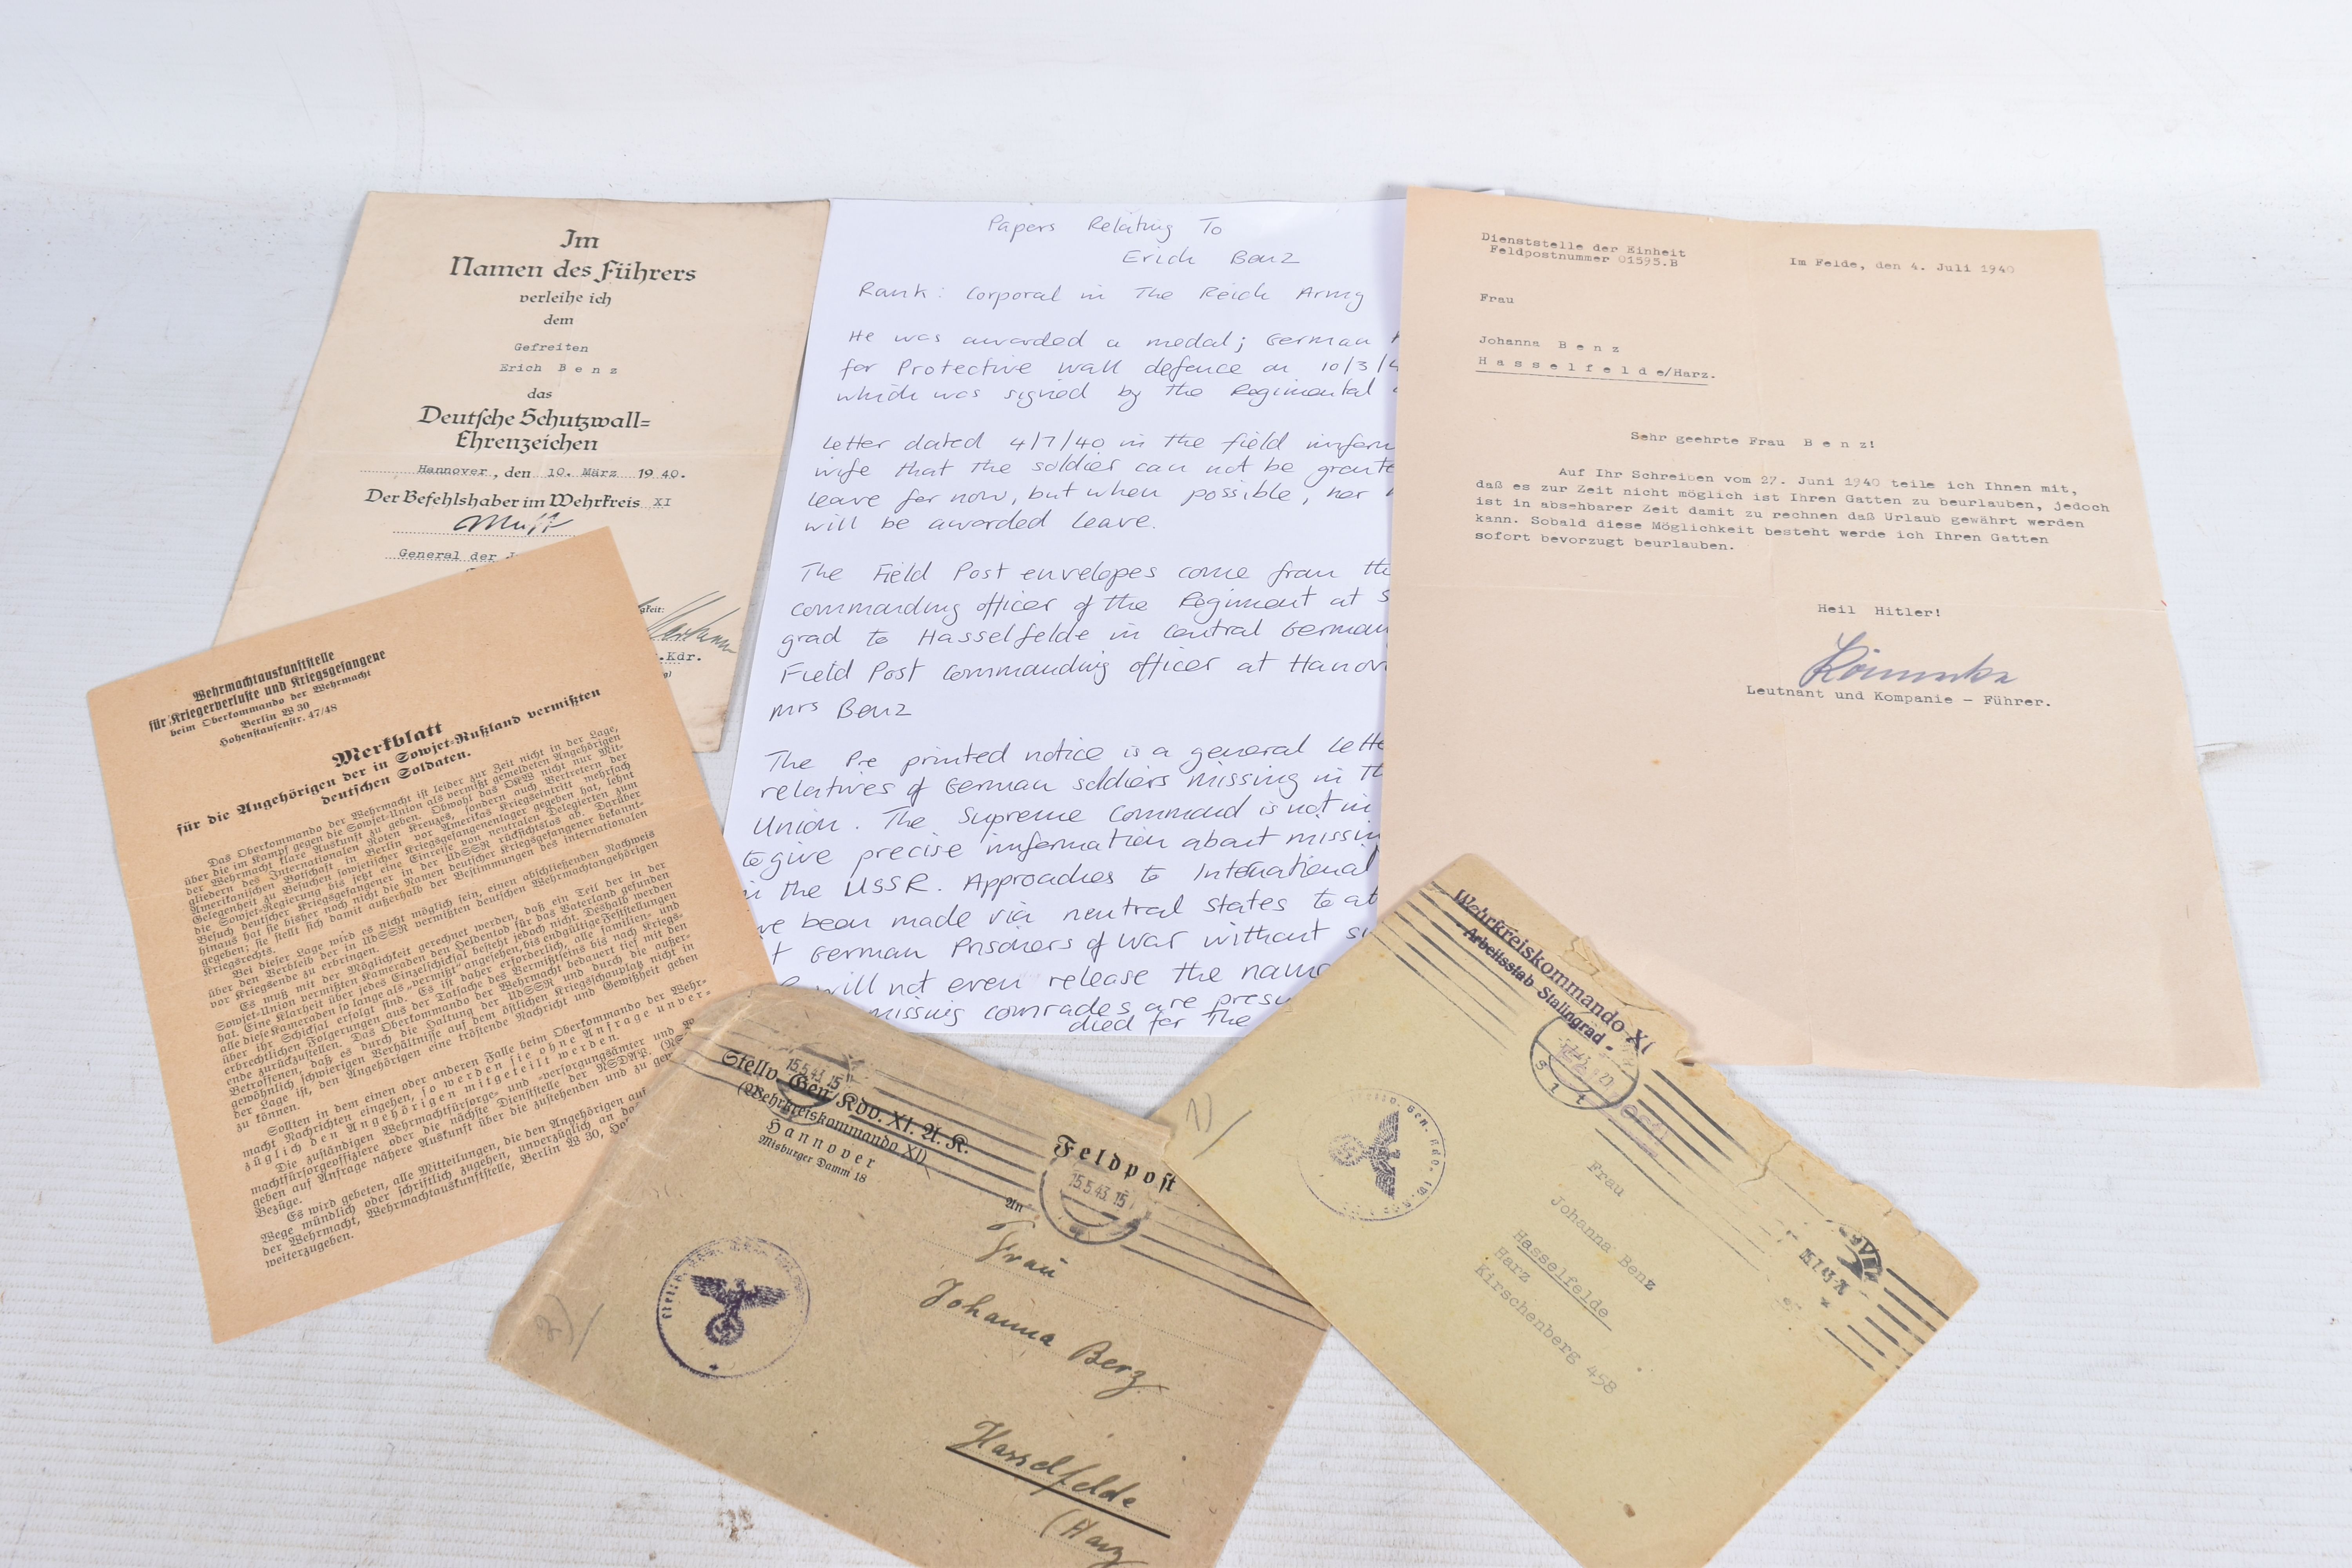 PAPERS RELATING TO ERICH BENZ, CORPORAL IN THE REICH ARMY, to include an award for Protective Wall